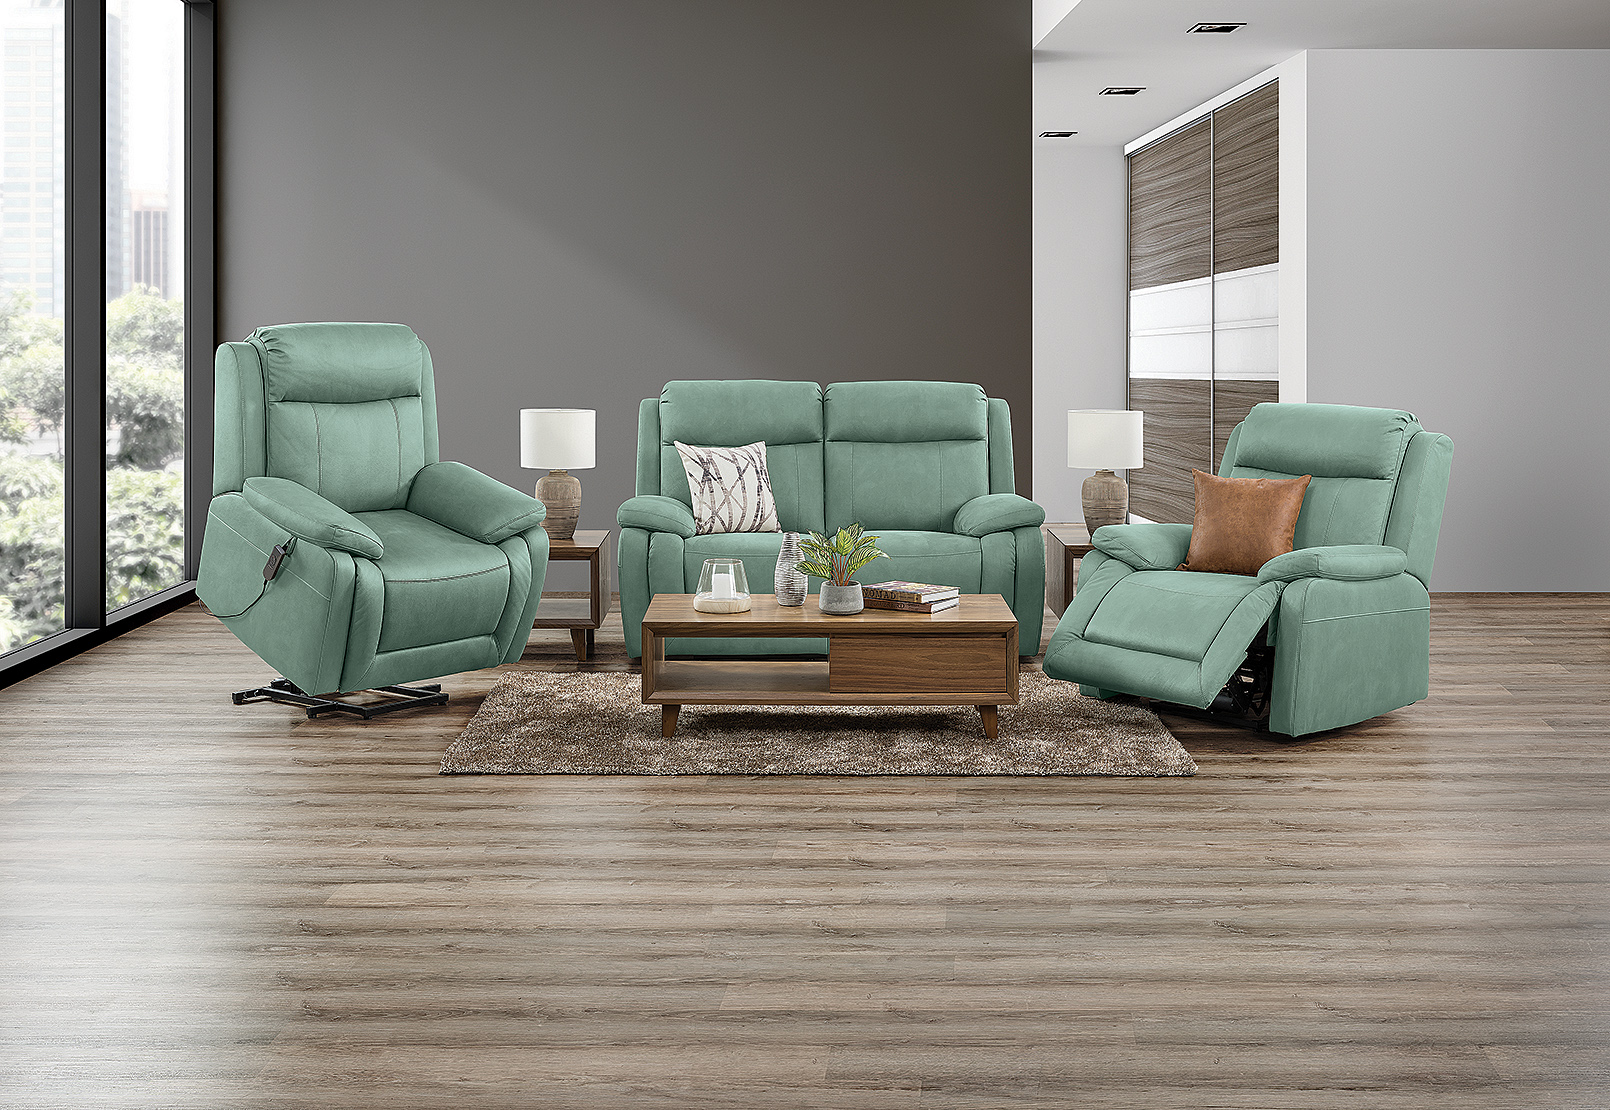 GREEN SAN MARCO Fabric 3 Piece Recliner Lift Suite with 2 Seater